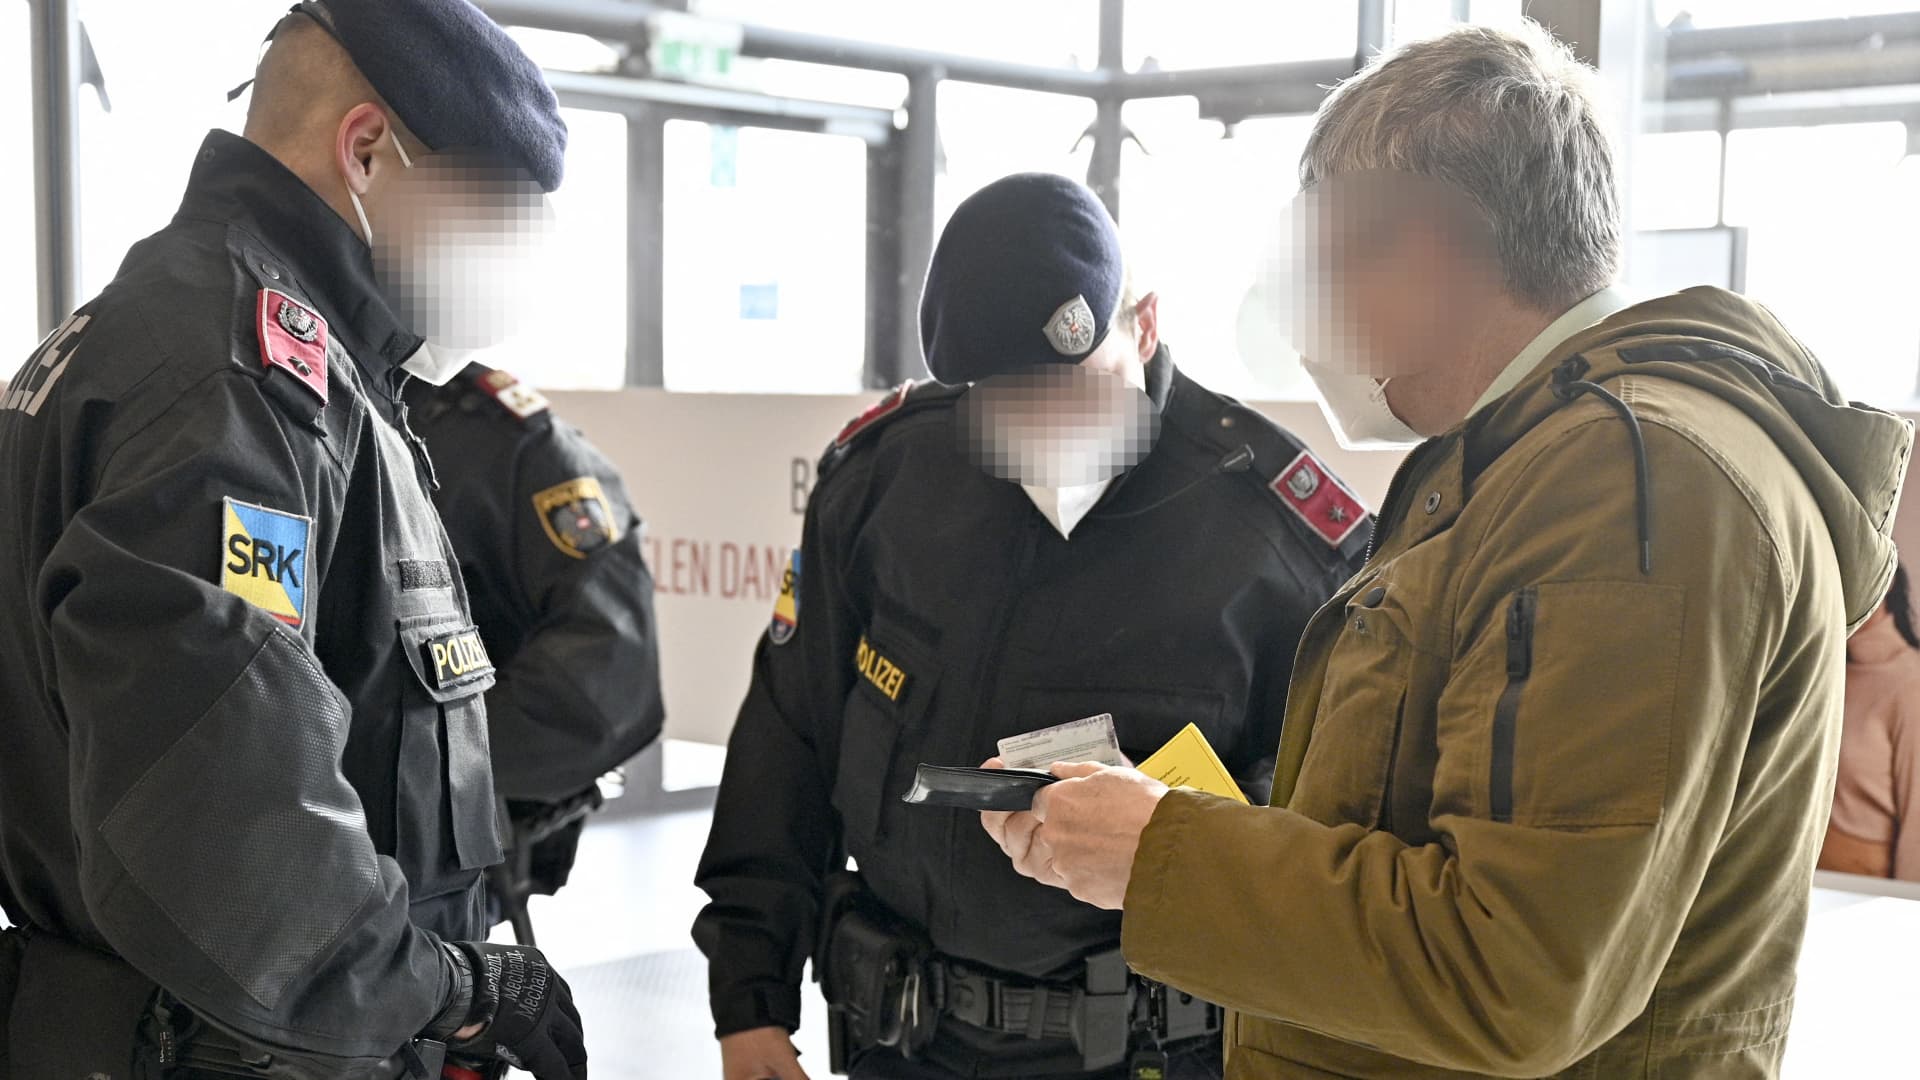 Austrian police officers check a man's identity and vaccination certificate during a control in Voesendorf, district Moedling, Austria, on November 16, 2021.